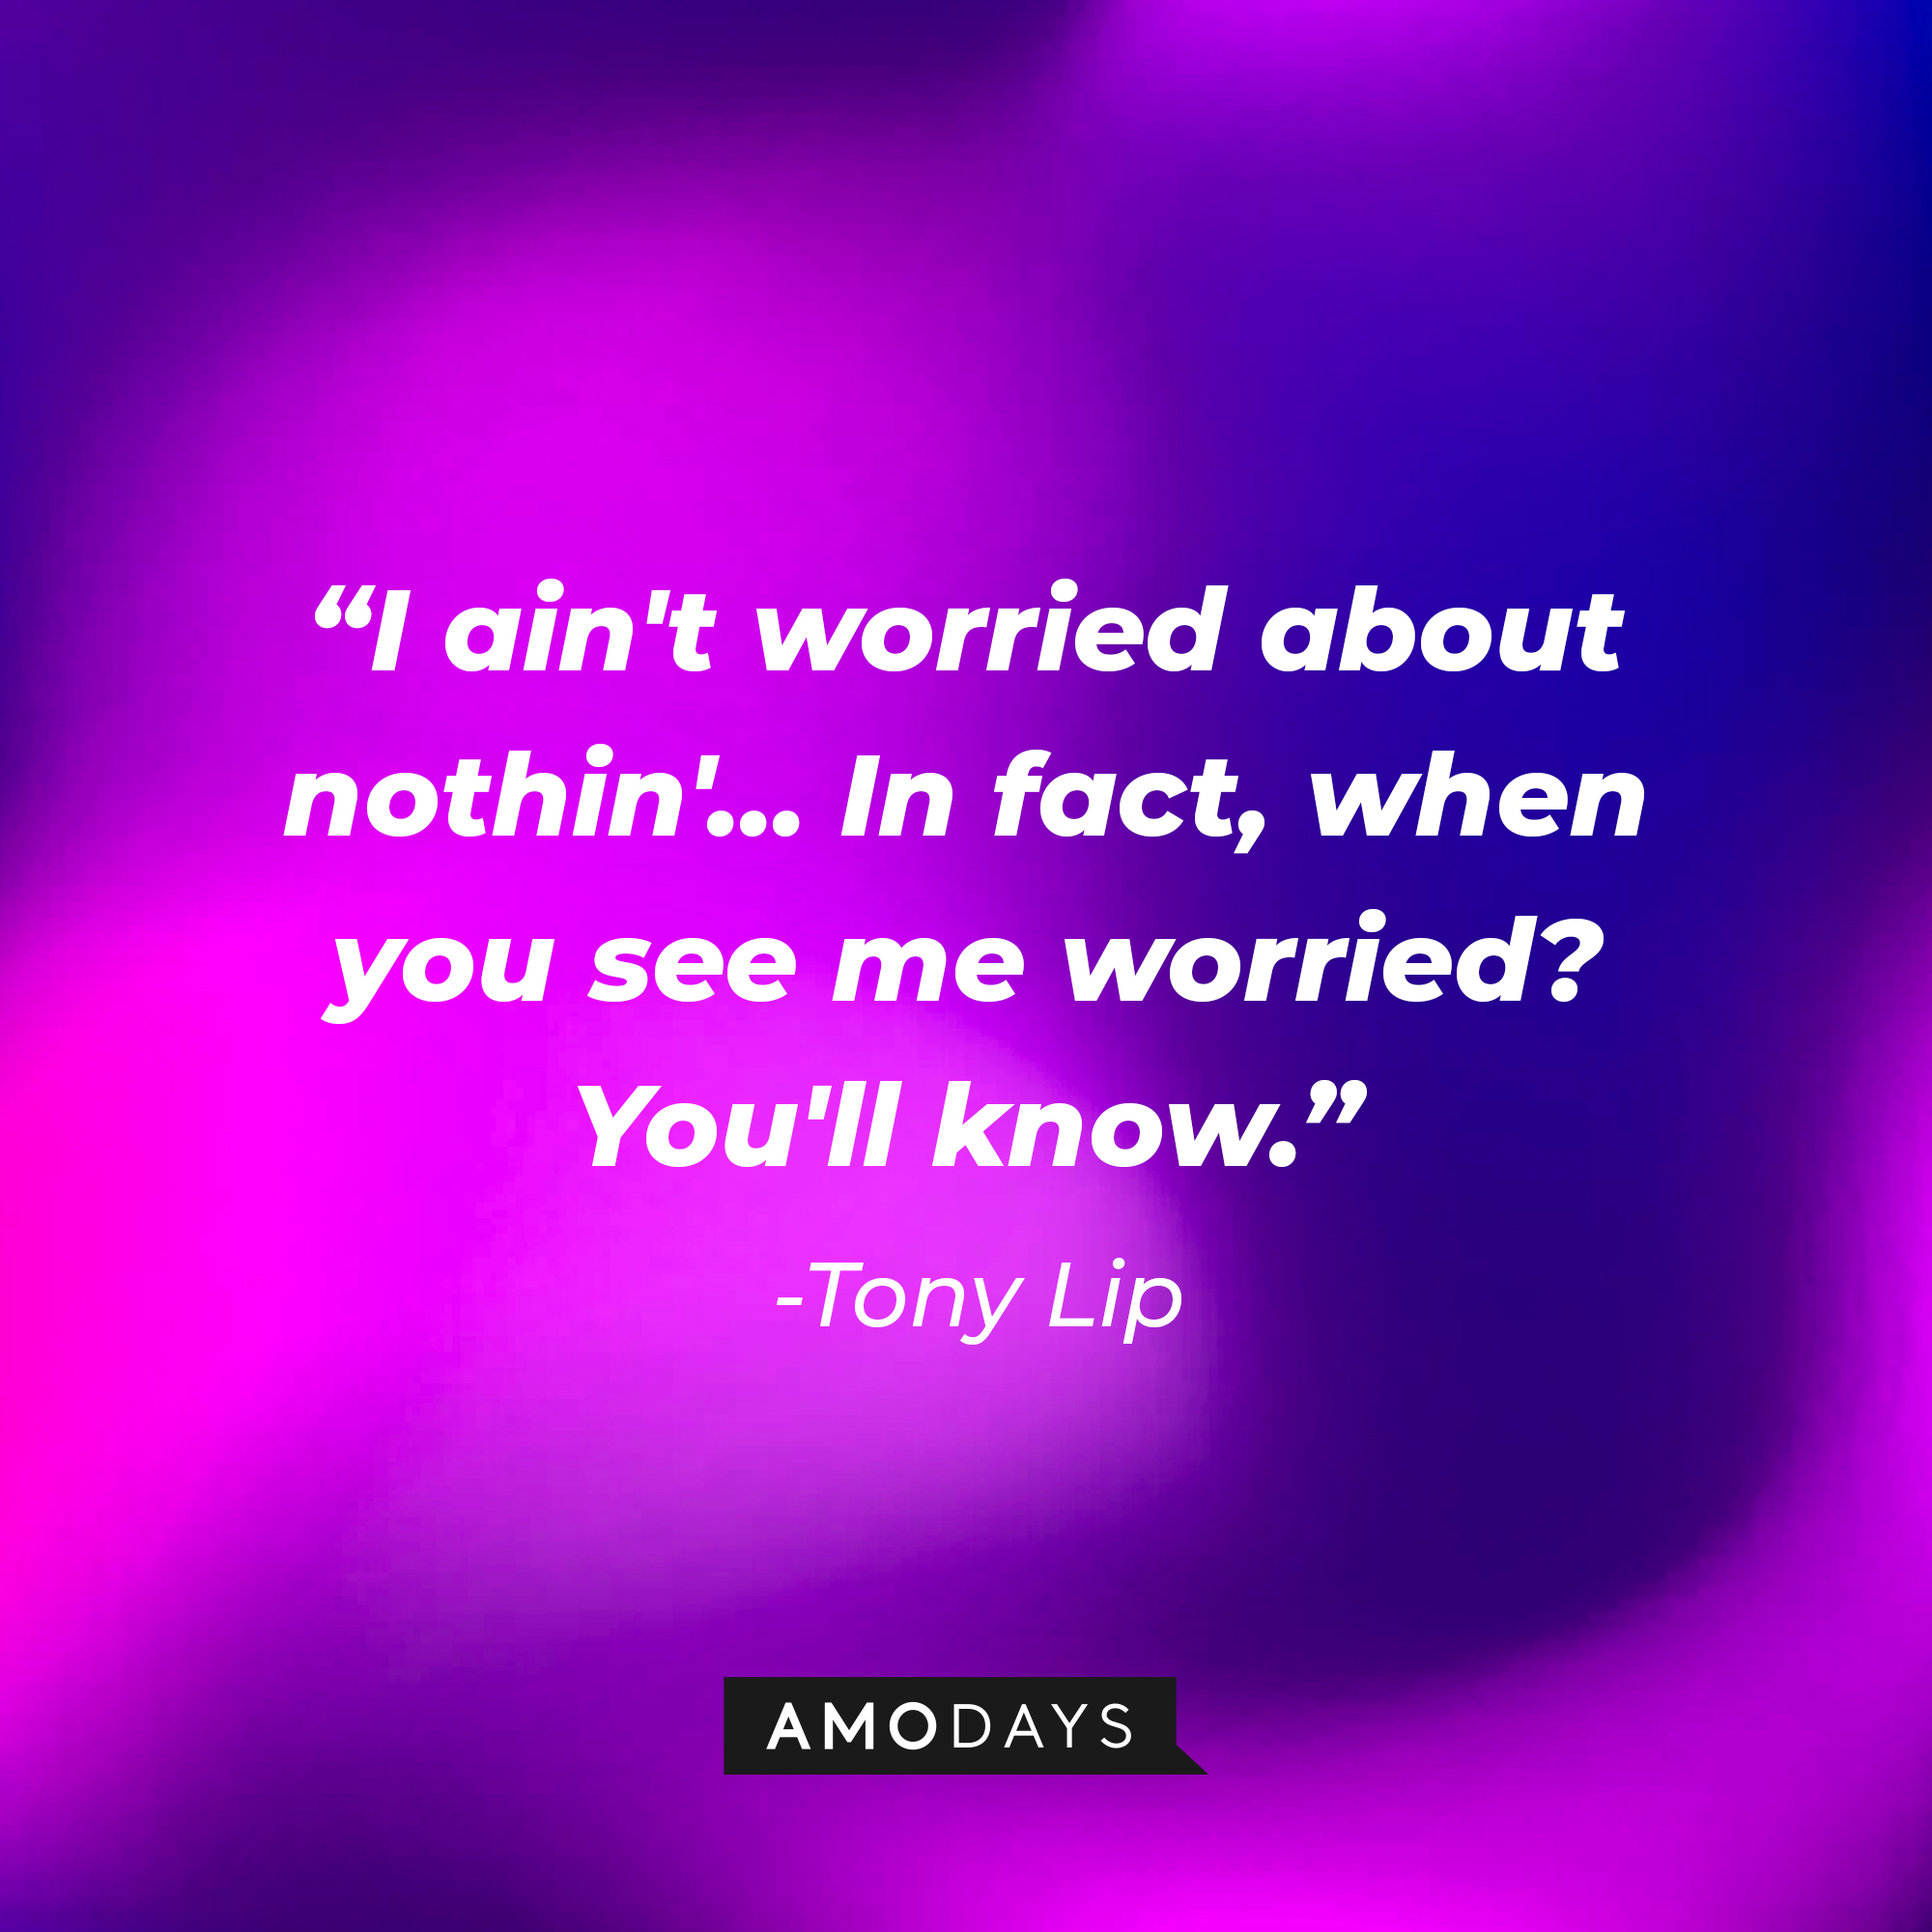 Tony Lip's quote: “I ain't worried about nothin'... In fact, when you see me worried? You'll know.” | Source: Amodays